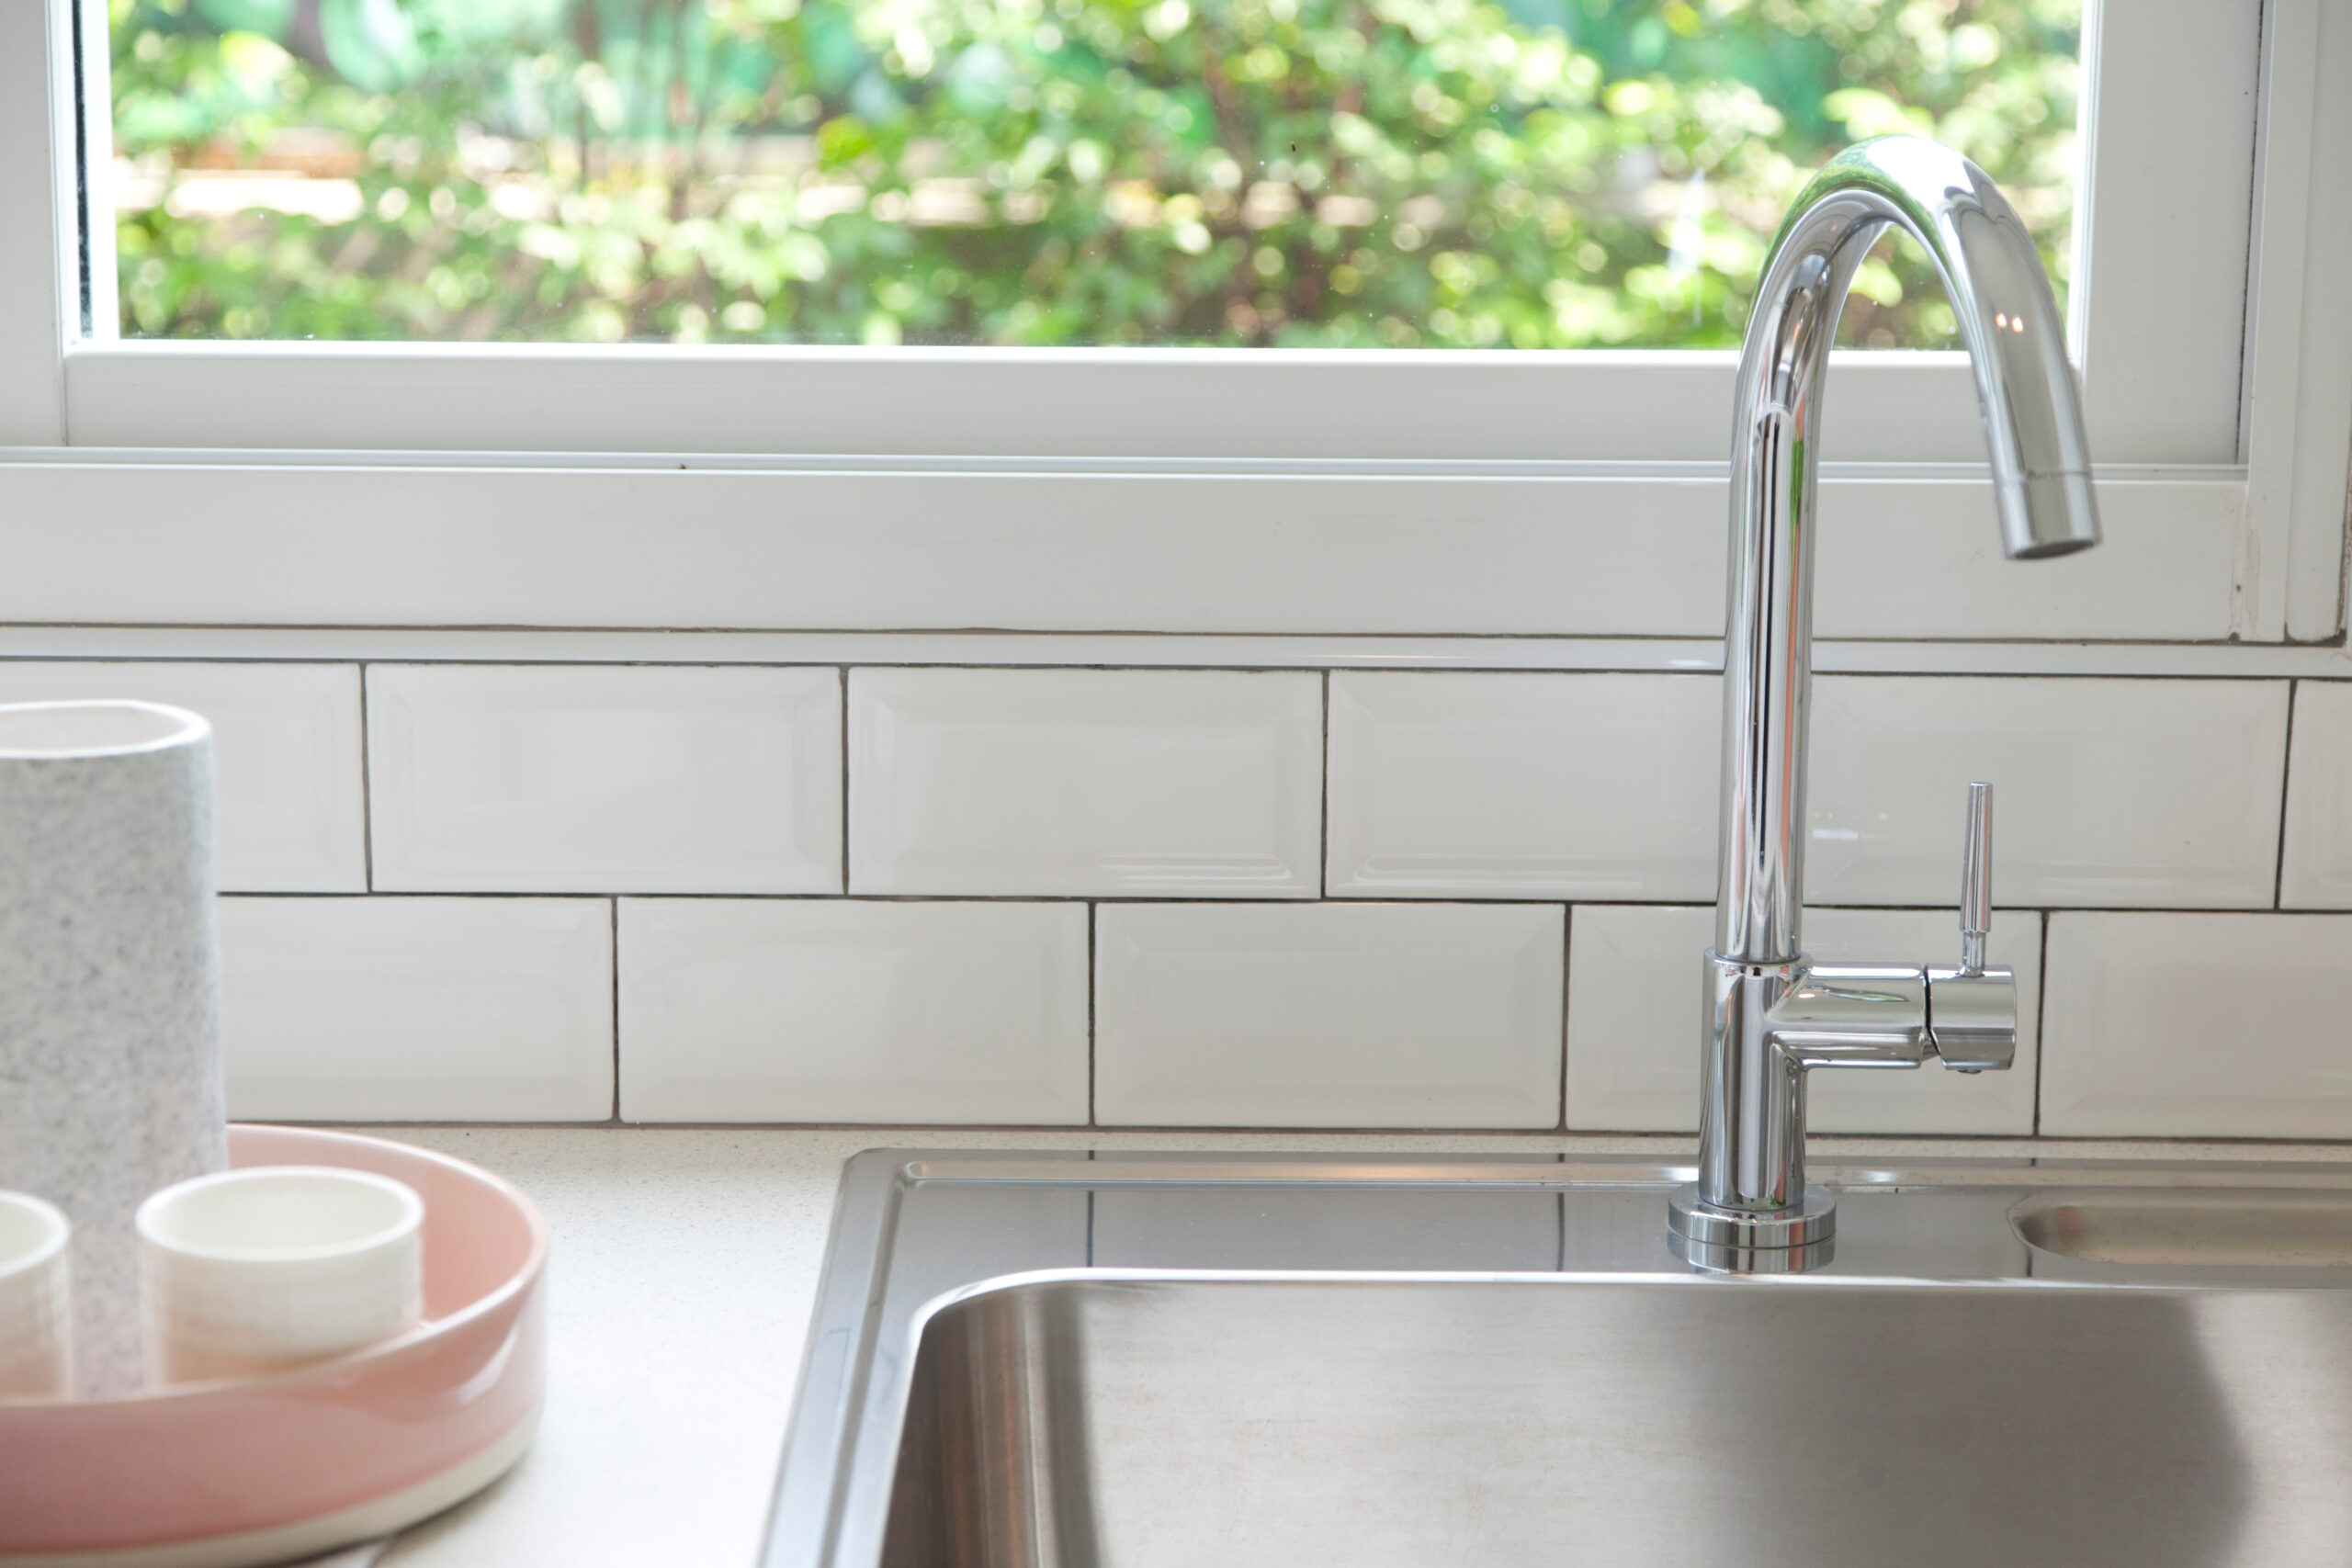 Upgraded kitchen sink faucet with window and white tile backsplash.